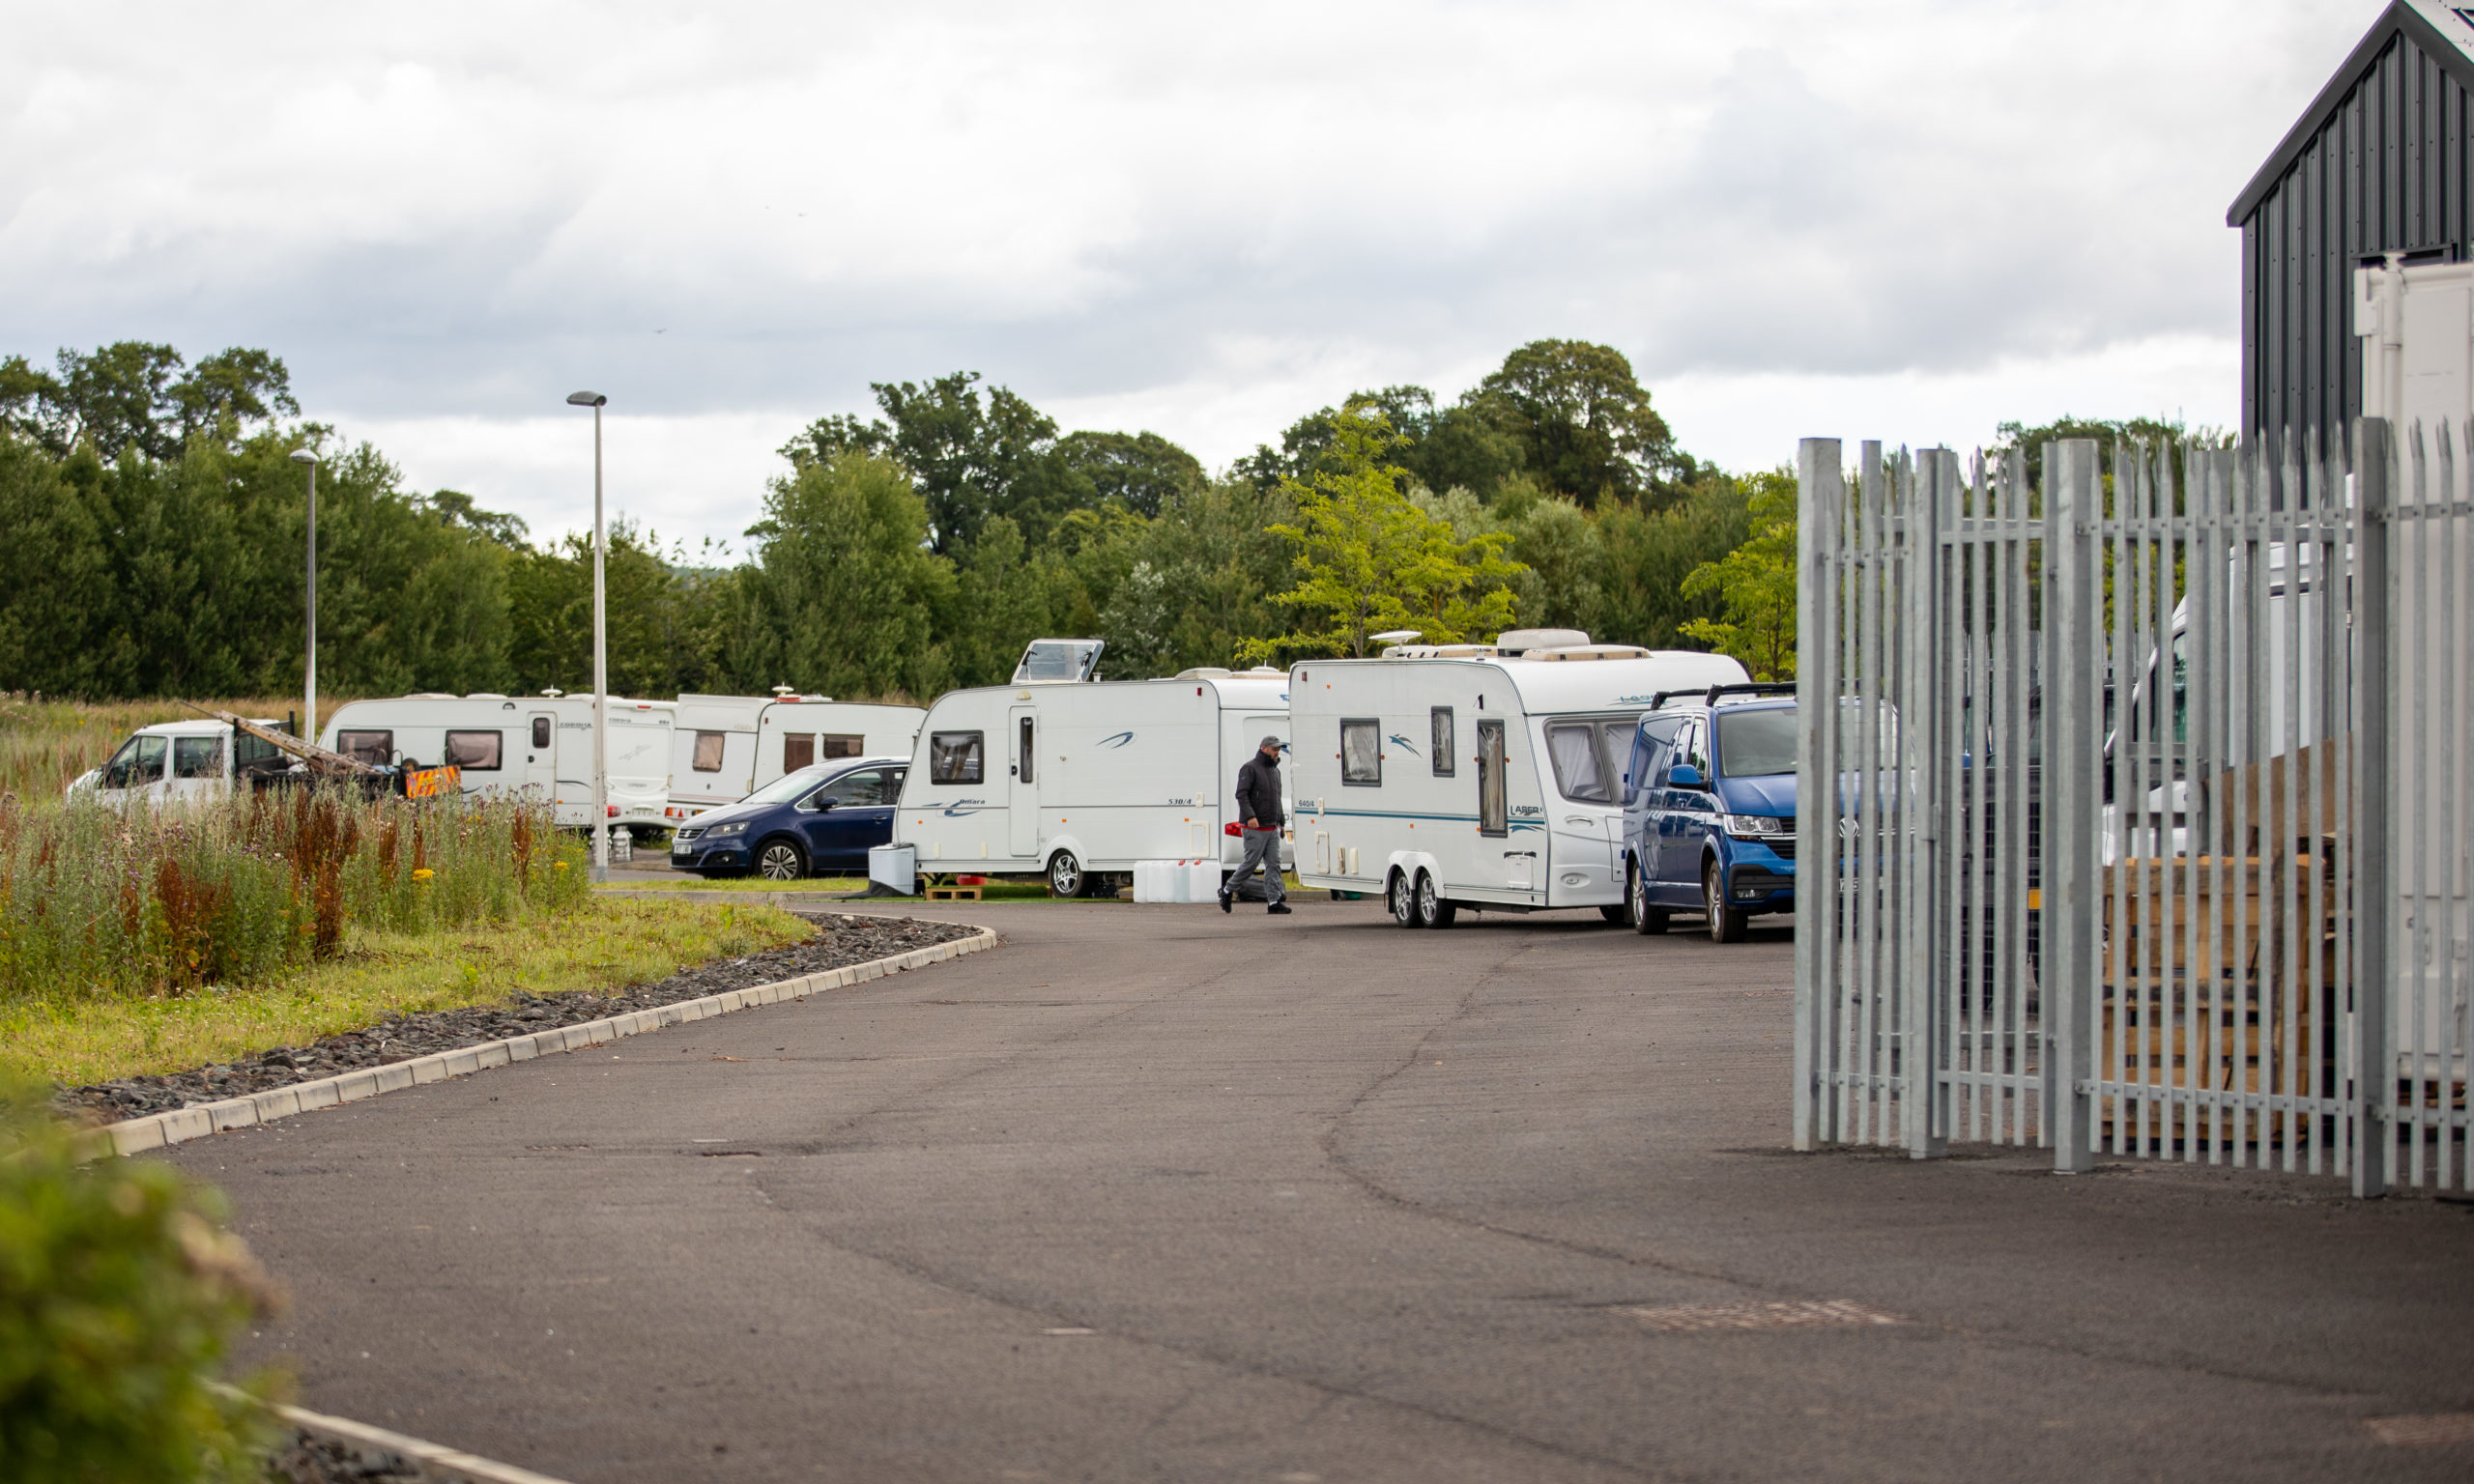 Over a dozen traveller caravans have parked up at the industrial estate at Arran Road in North Muirton in Perth.